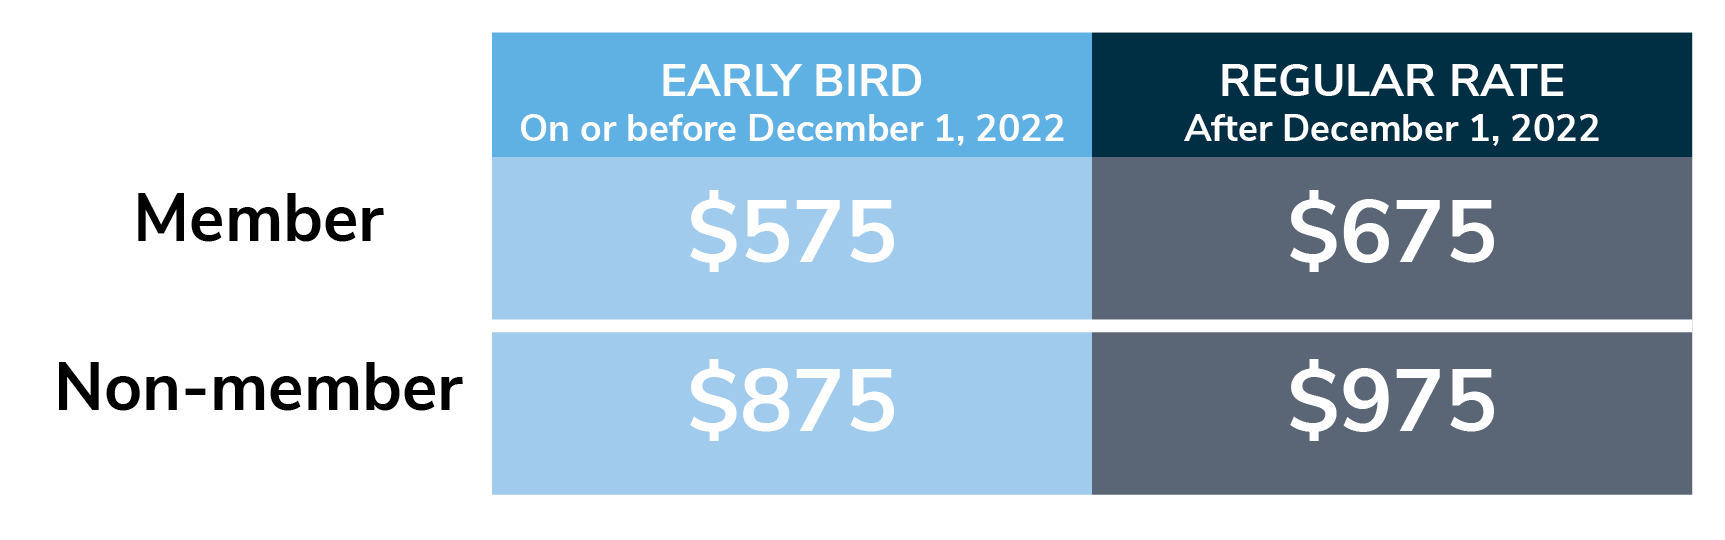 Member rate: Early Bird (on or before December 1, 2022) $575. Regular Rate: $675. Non-member rate: Early bird (on or before December 1, 2022) $875. Regular rate: $975